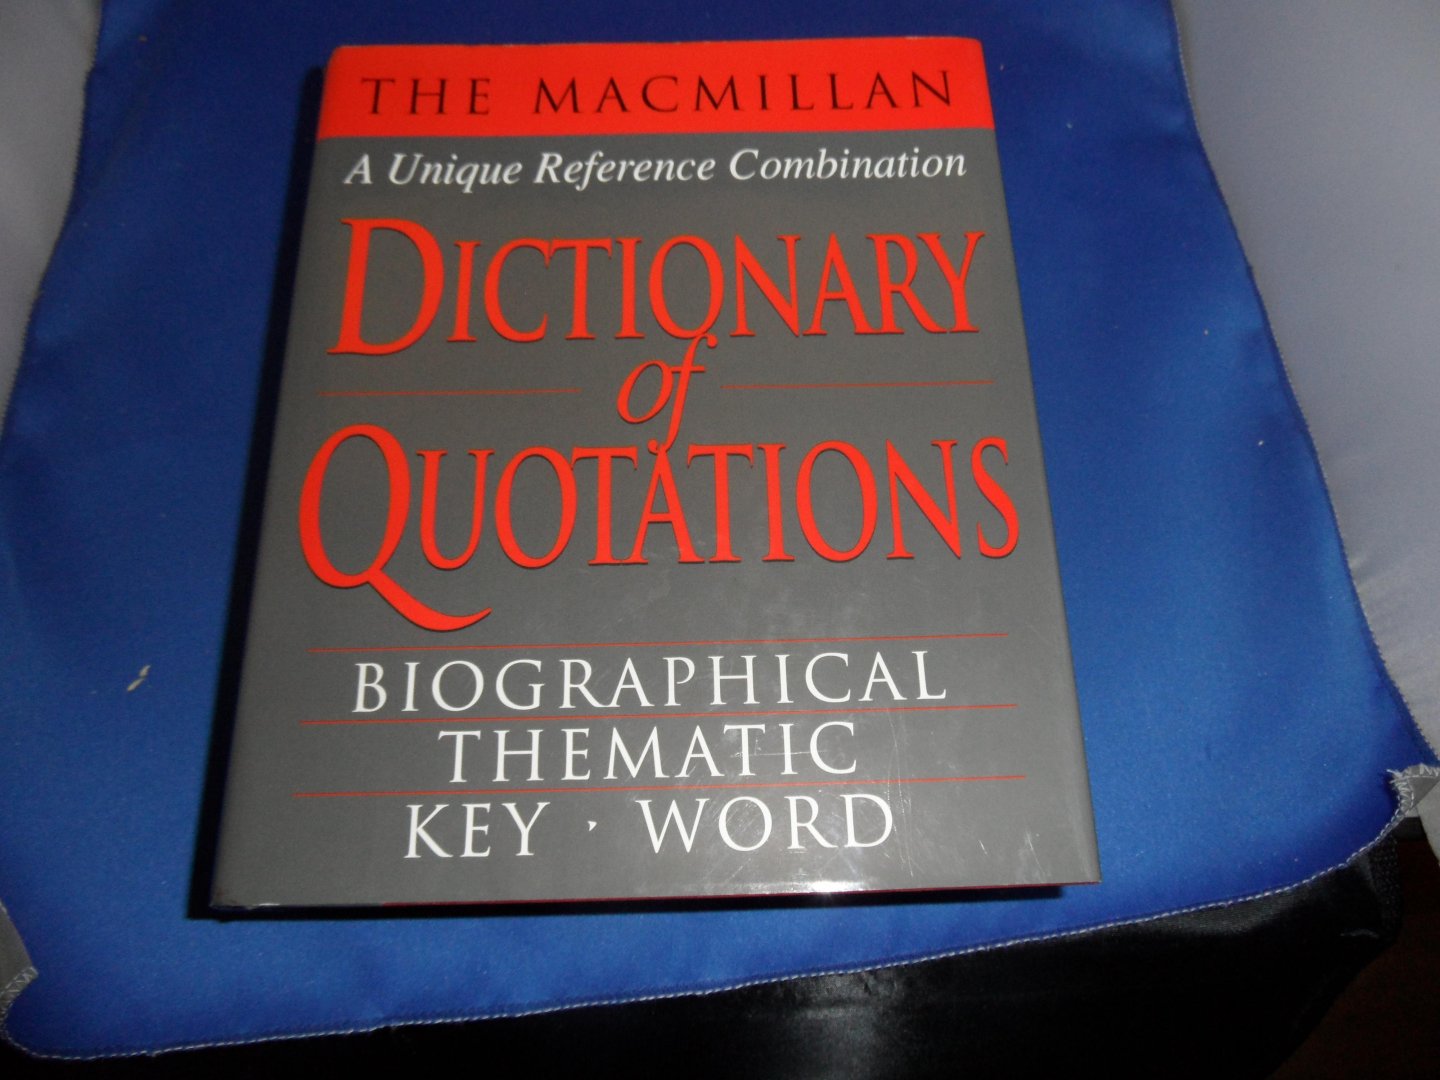  - The Macmillan dictionary of quotations